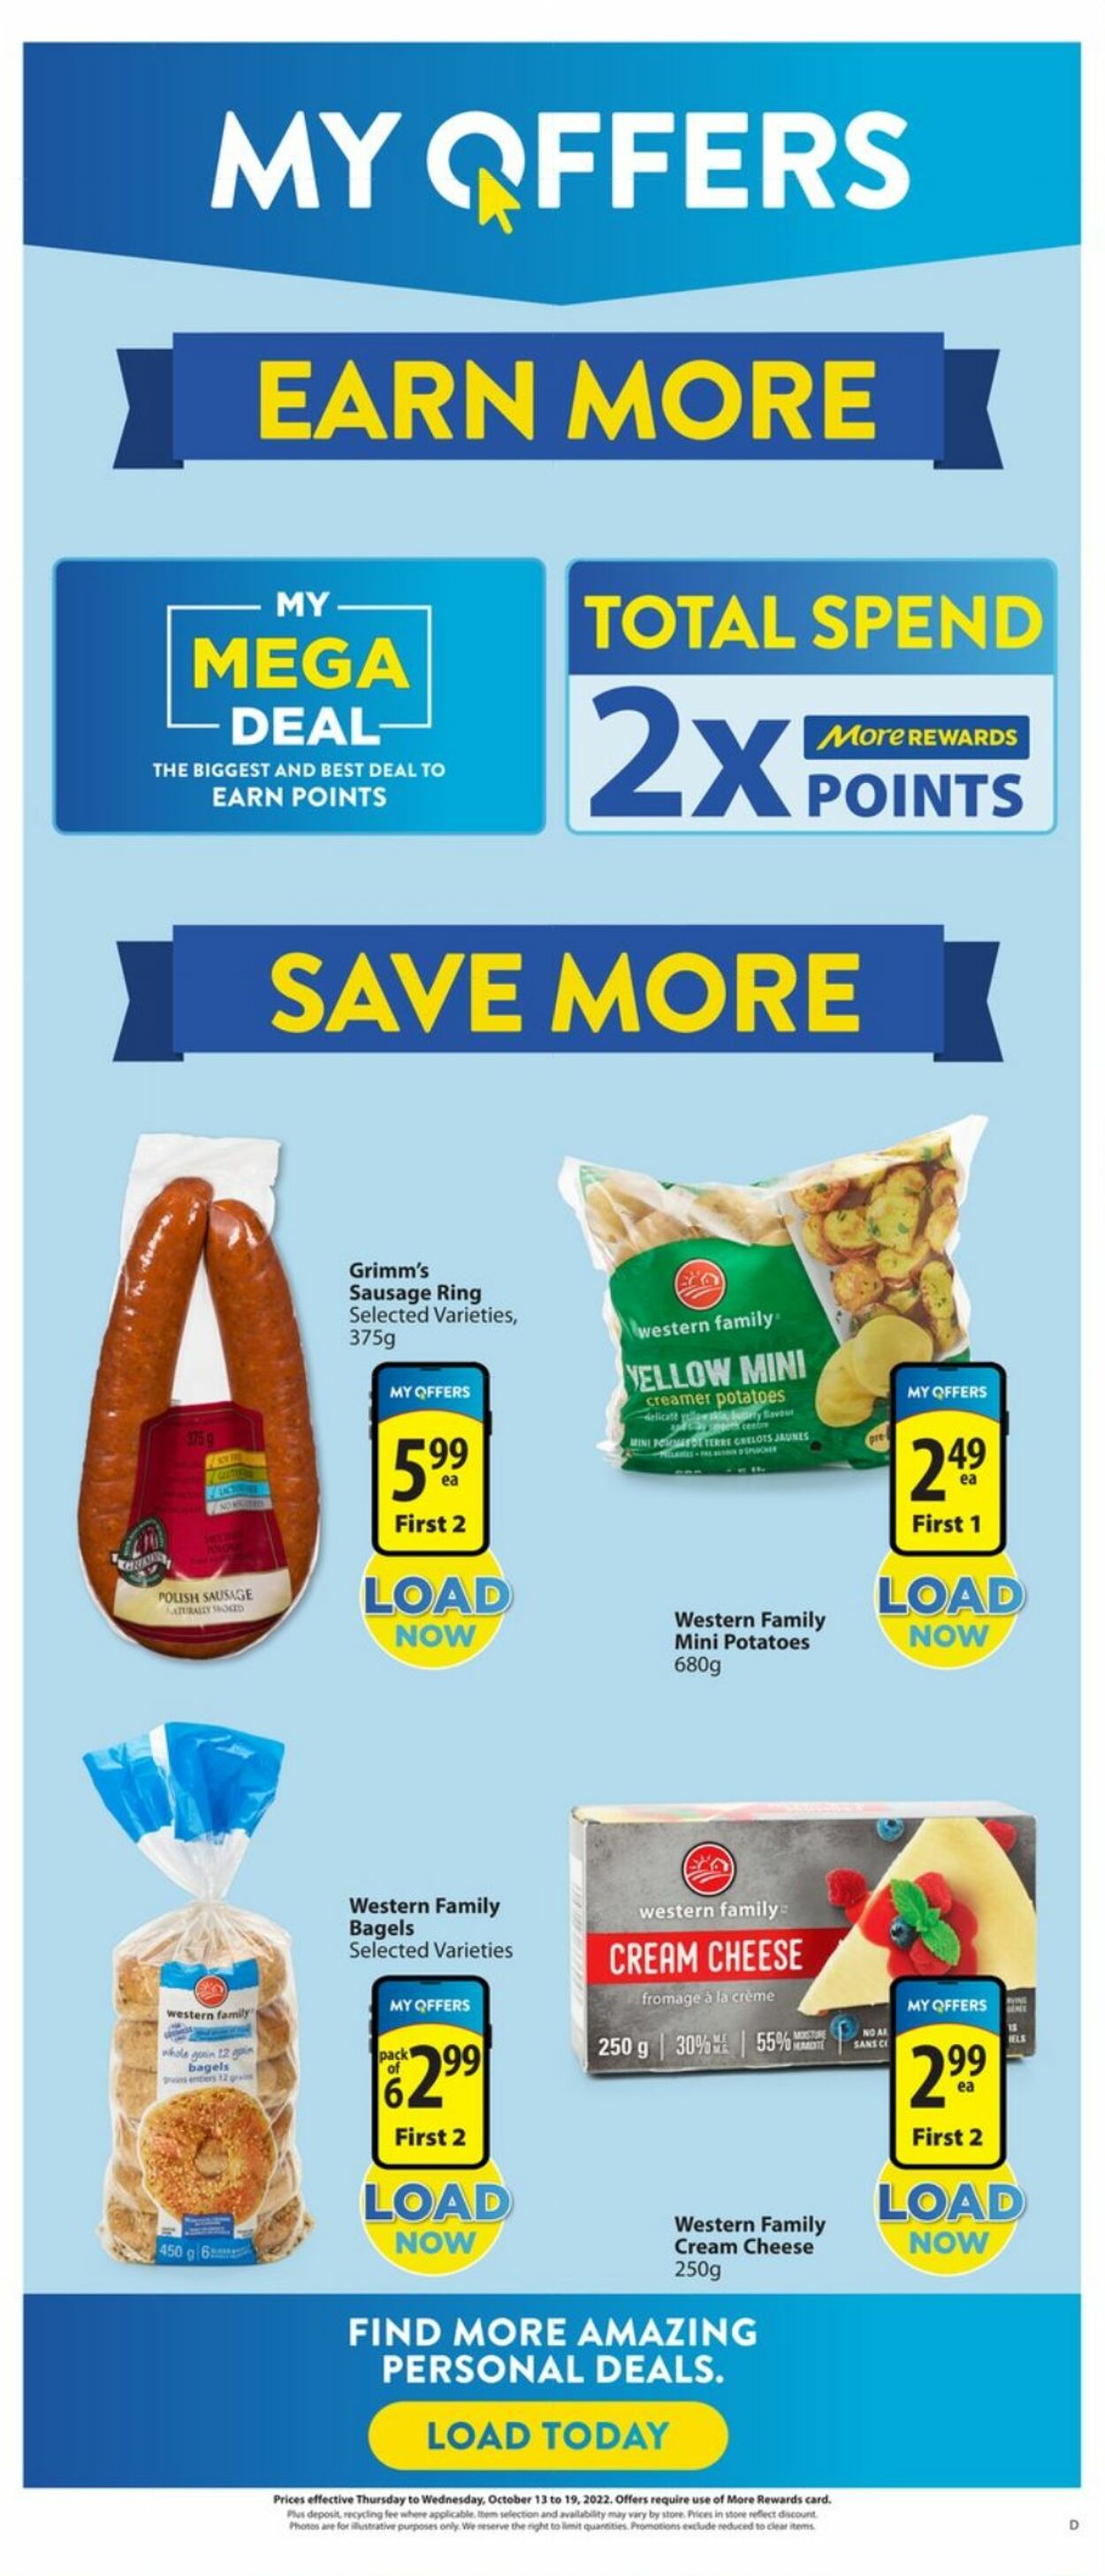 Circulaire Save-On-Foods 13.10.2022 - 19.10.2022